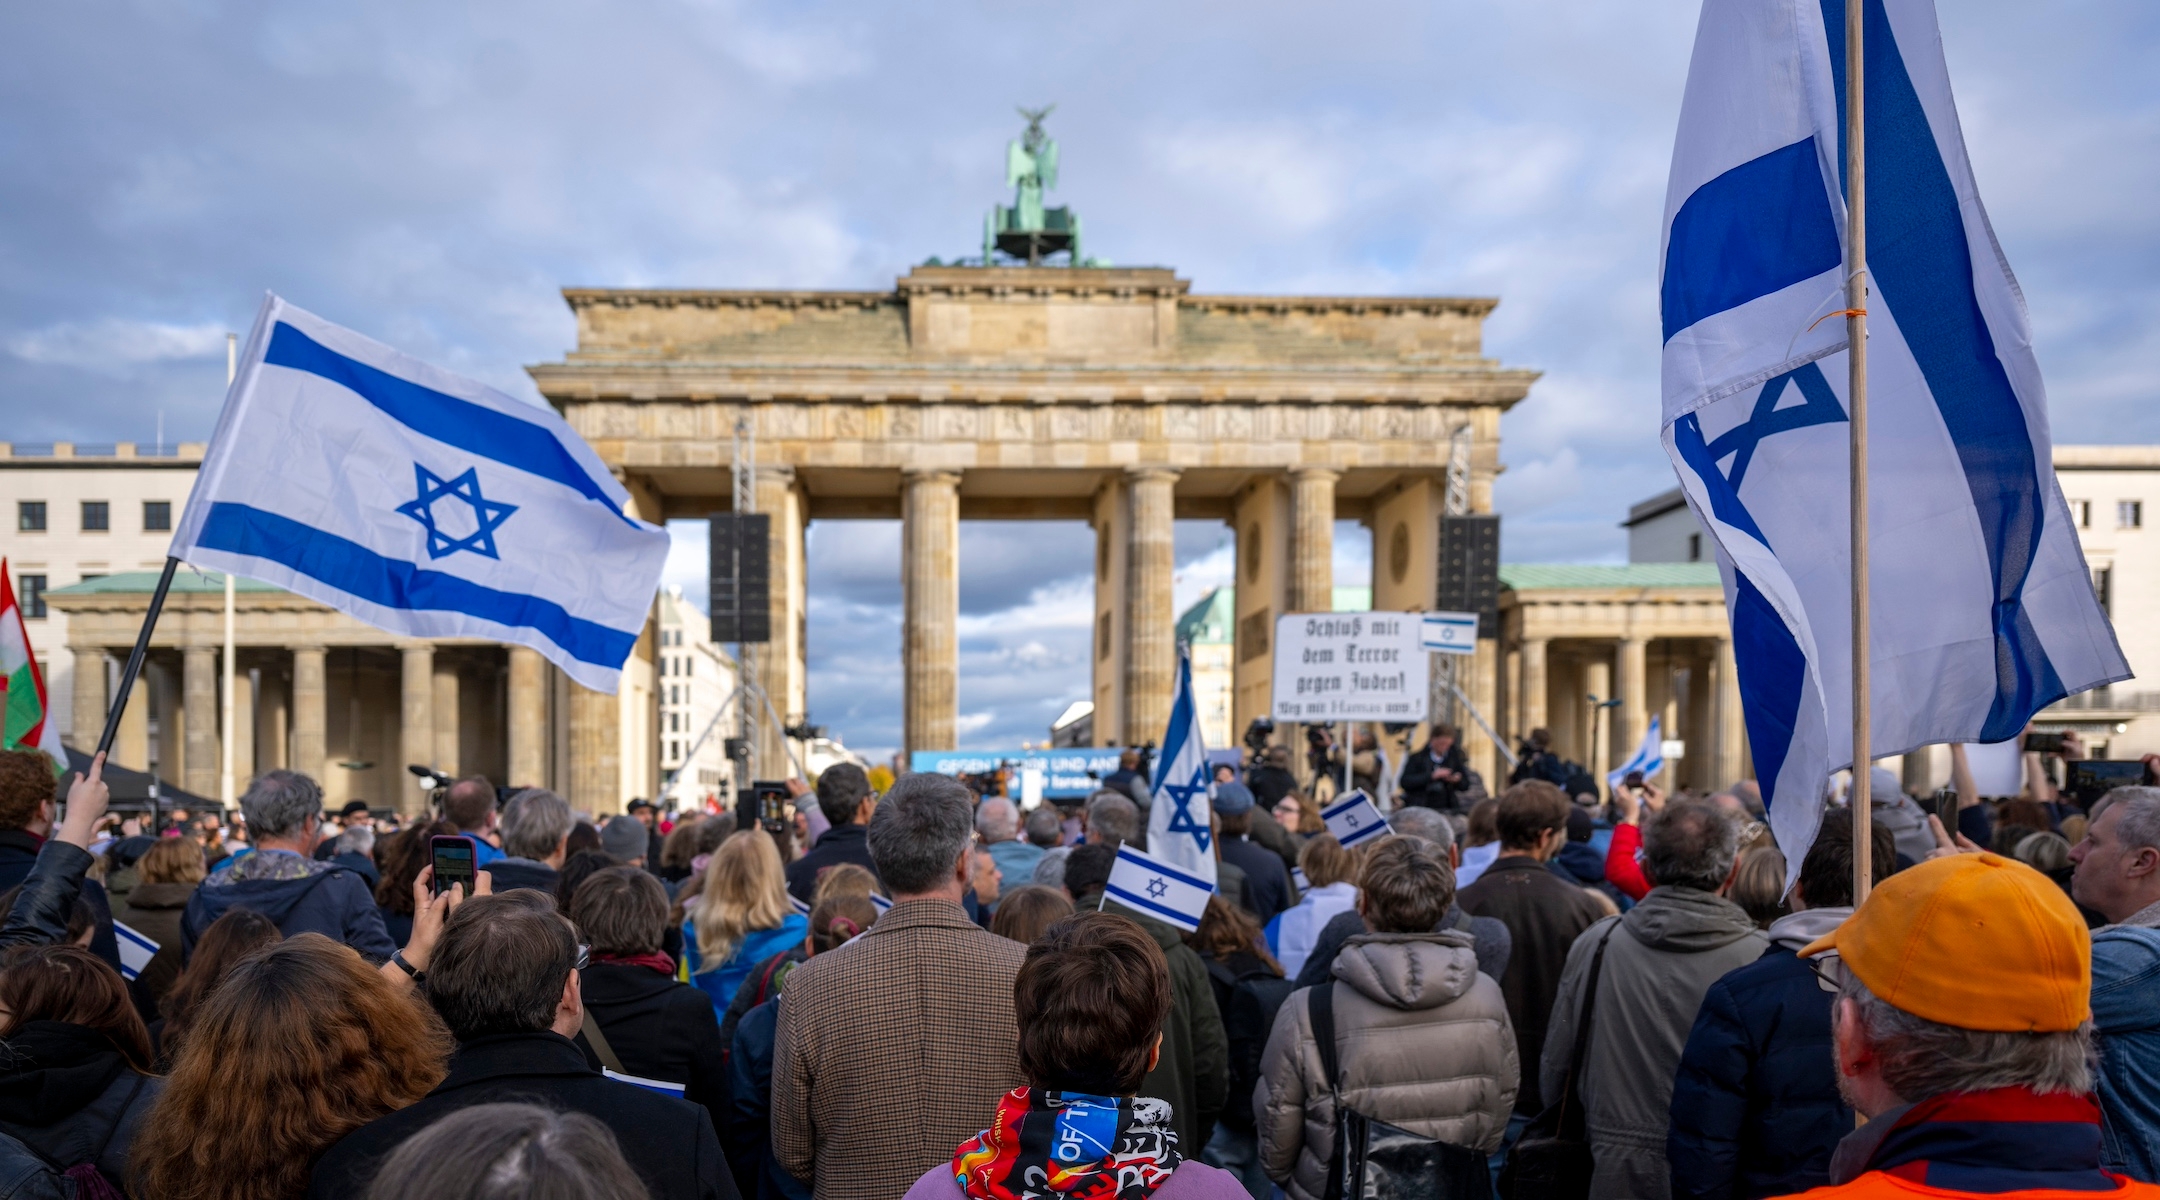 Thousands of demonstrators gather with Israeli flags in front of the Brandenburg Gate in Berlin, Oct. 22, 2023. (Monika Skolimowska/picture alliance via Getty Images)